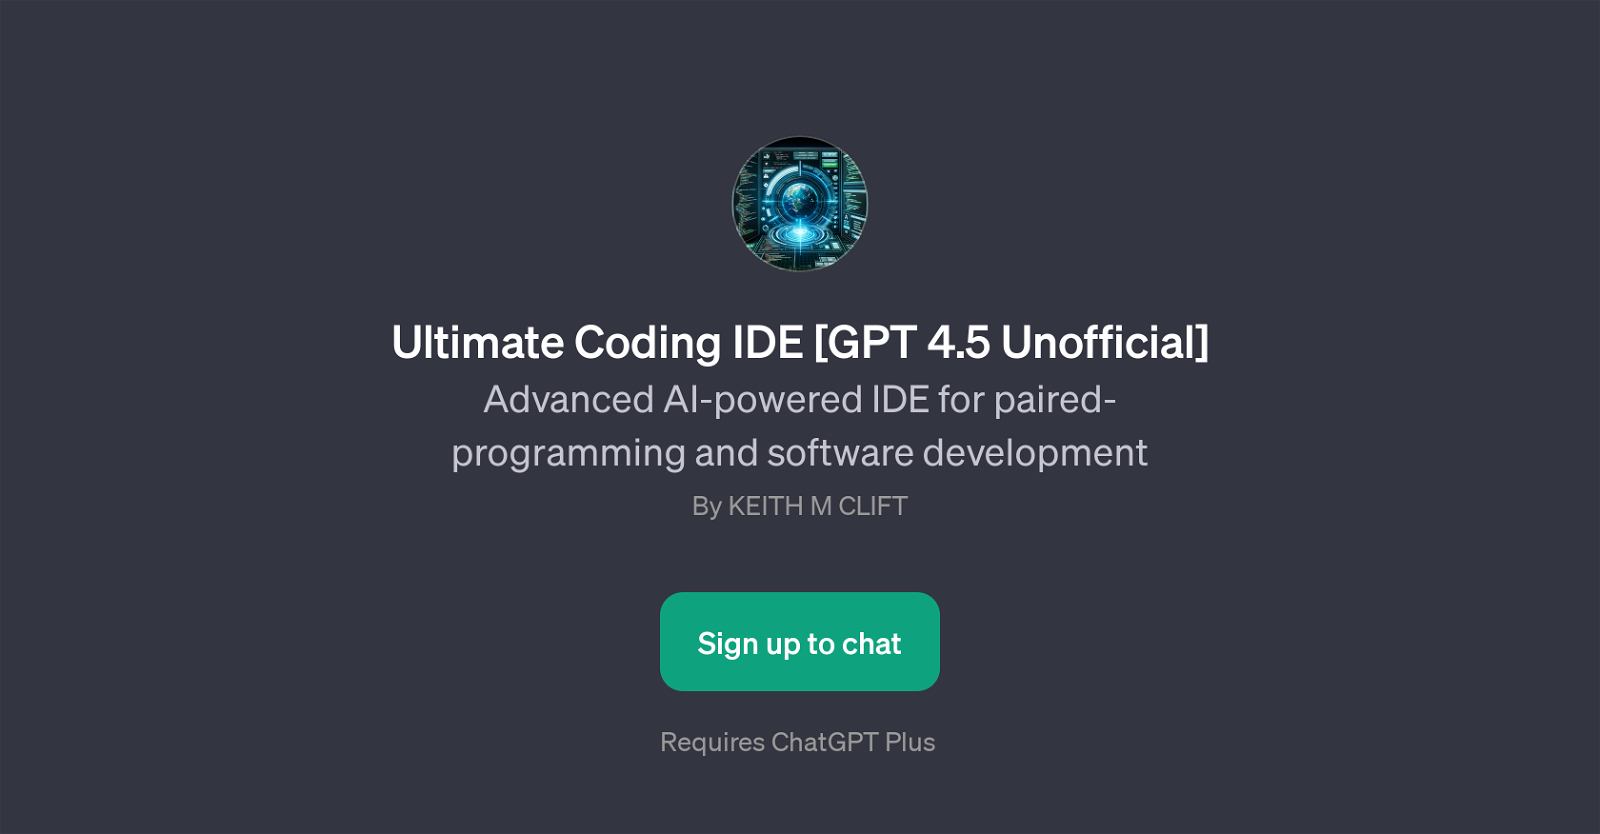 Ultimate Coding IDE [GPT 4.5 Unofficial] website